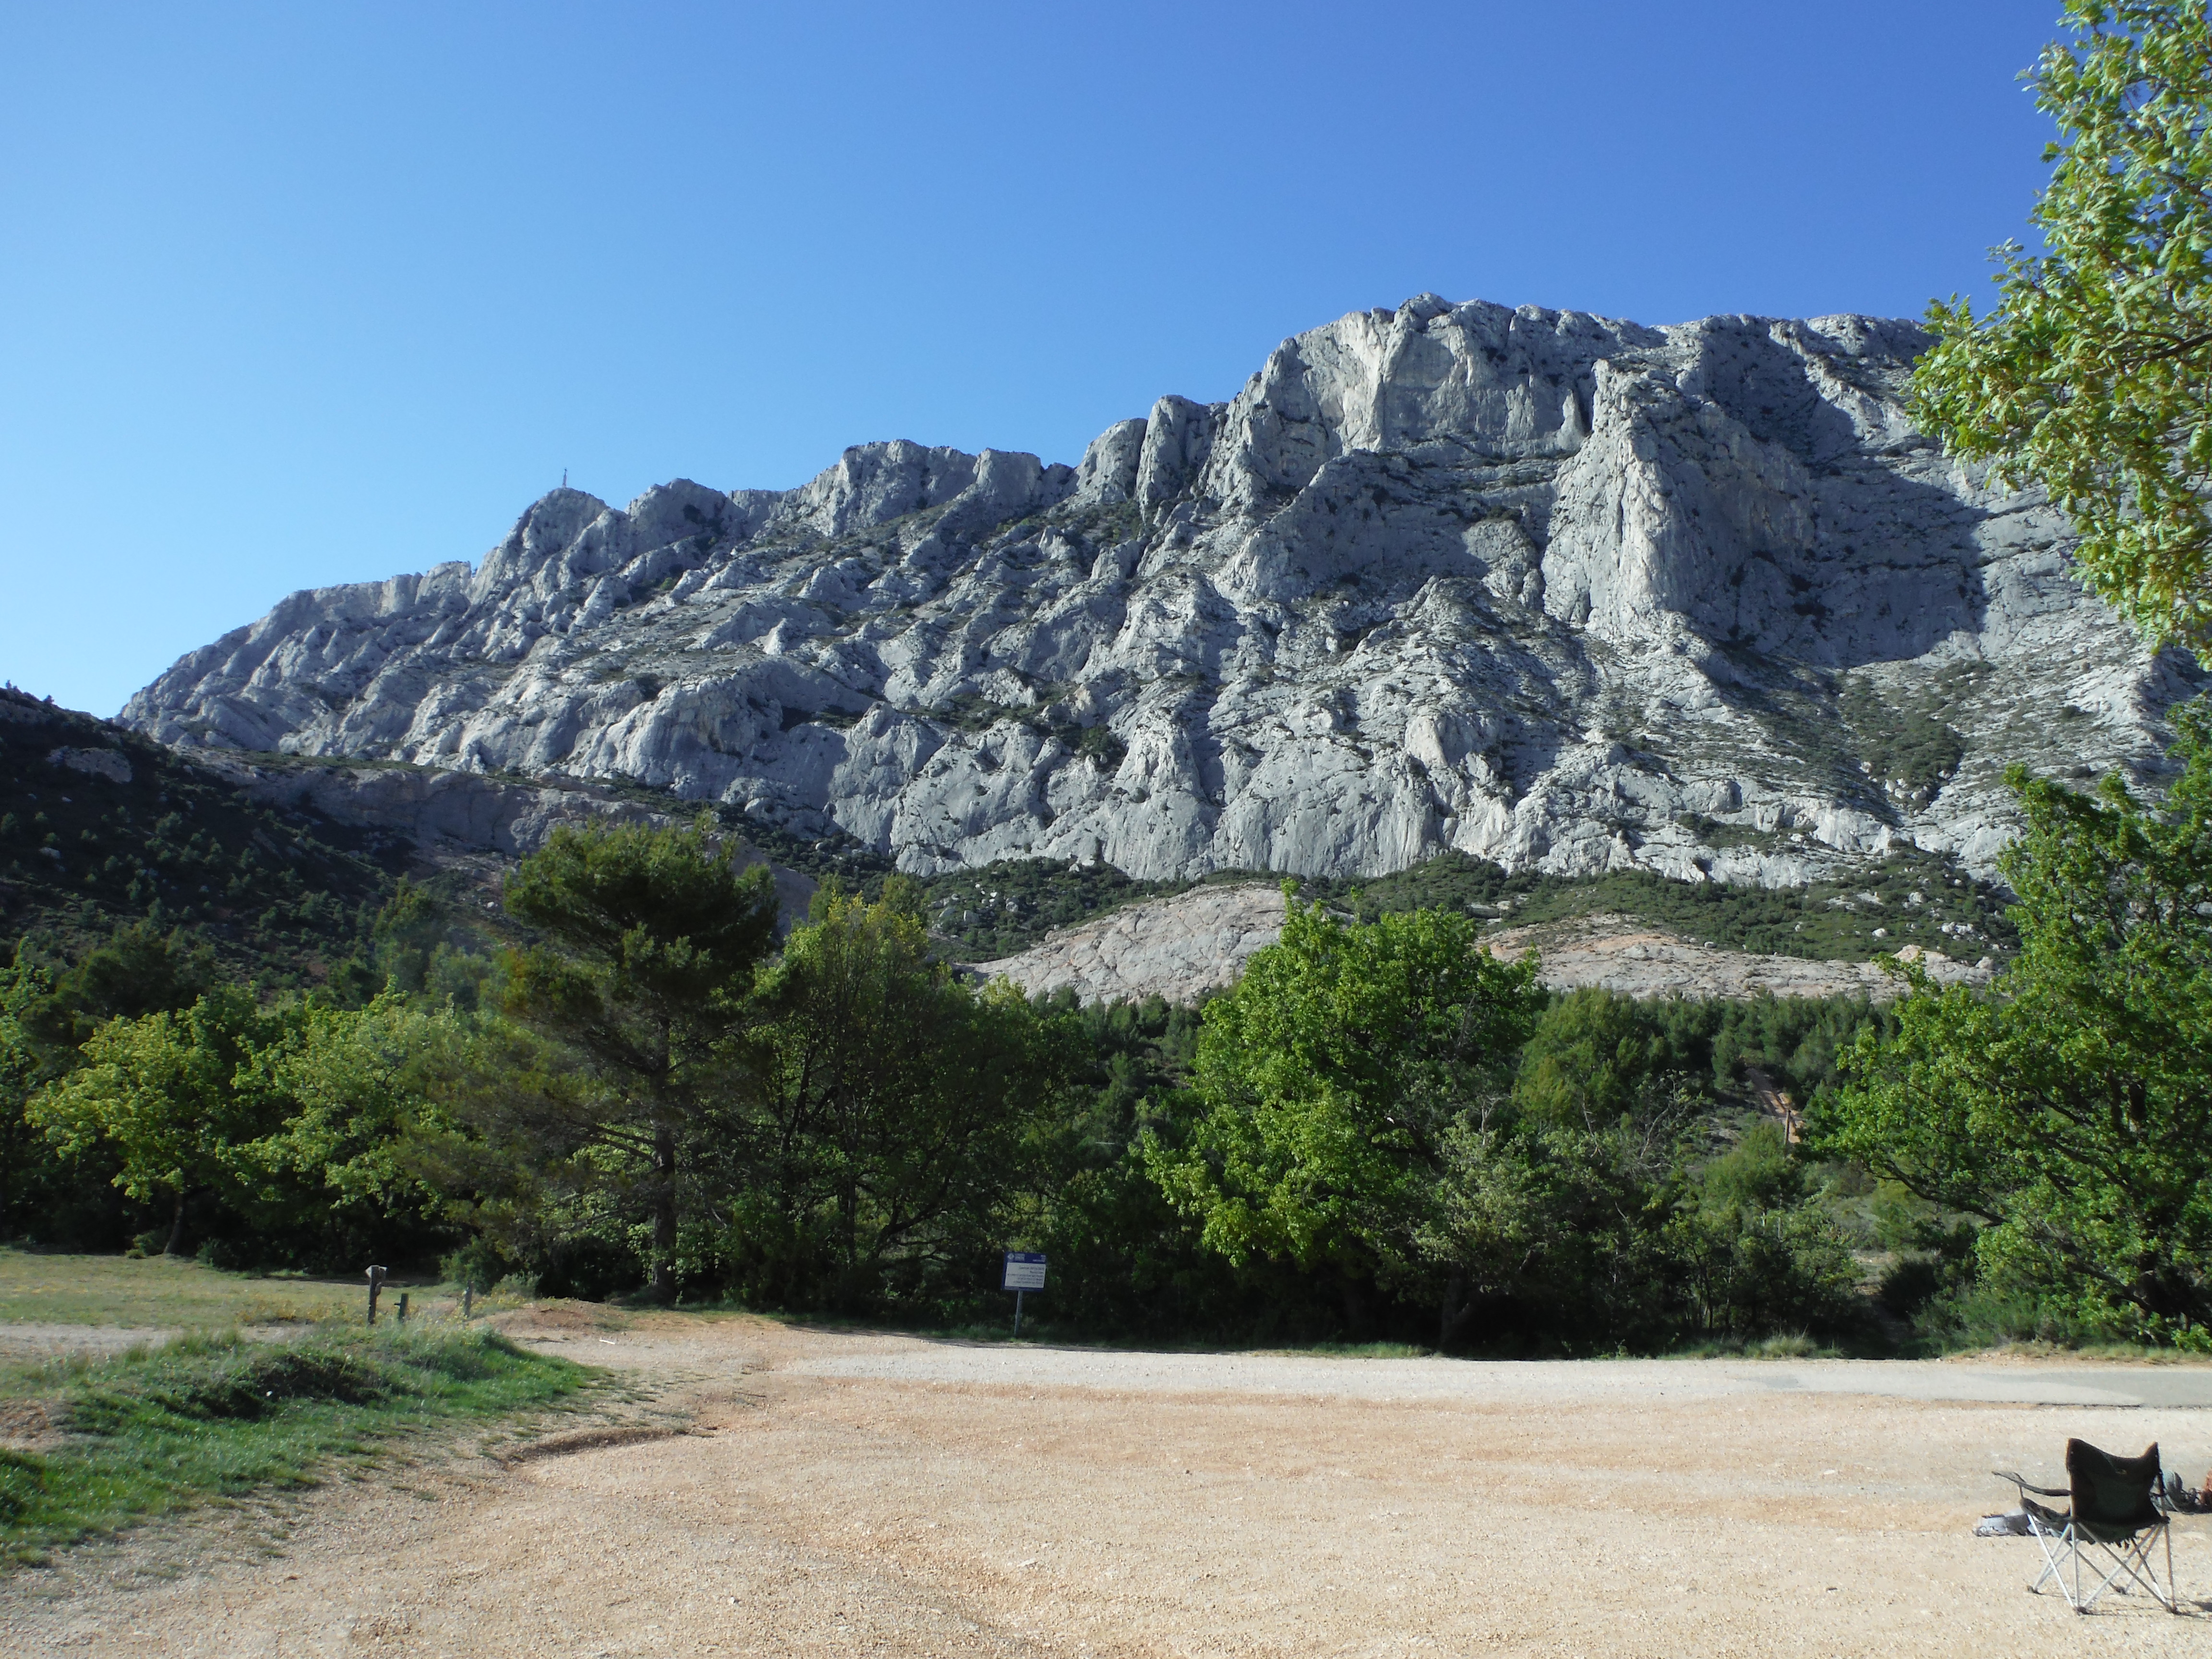 Only a small part of Mount Sainte Victoire